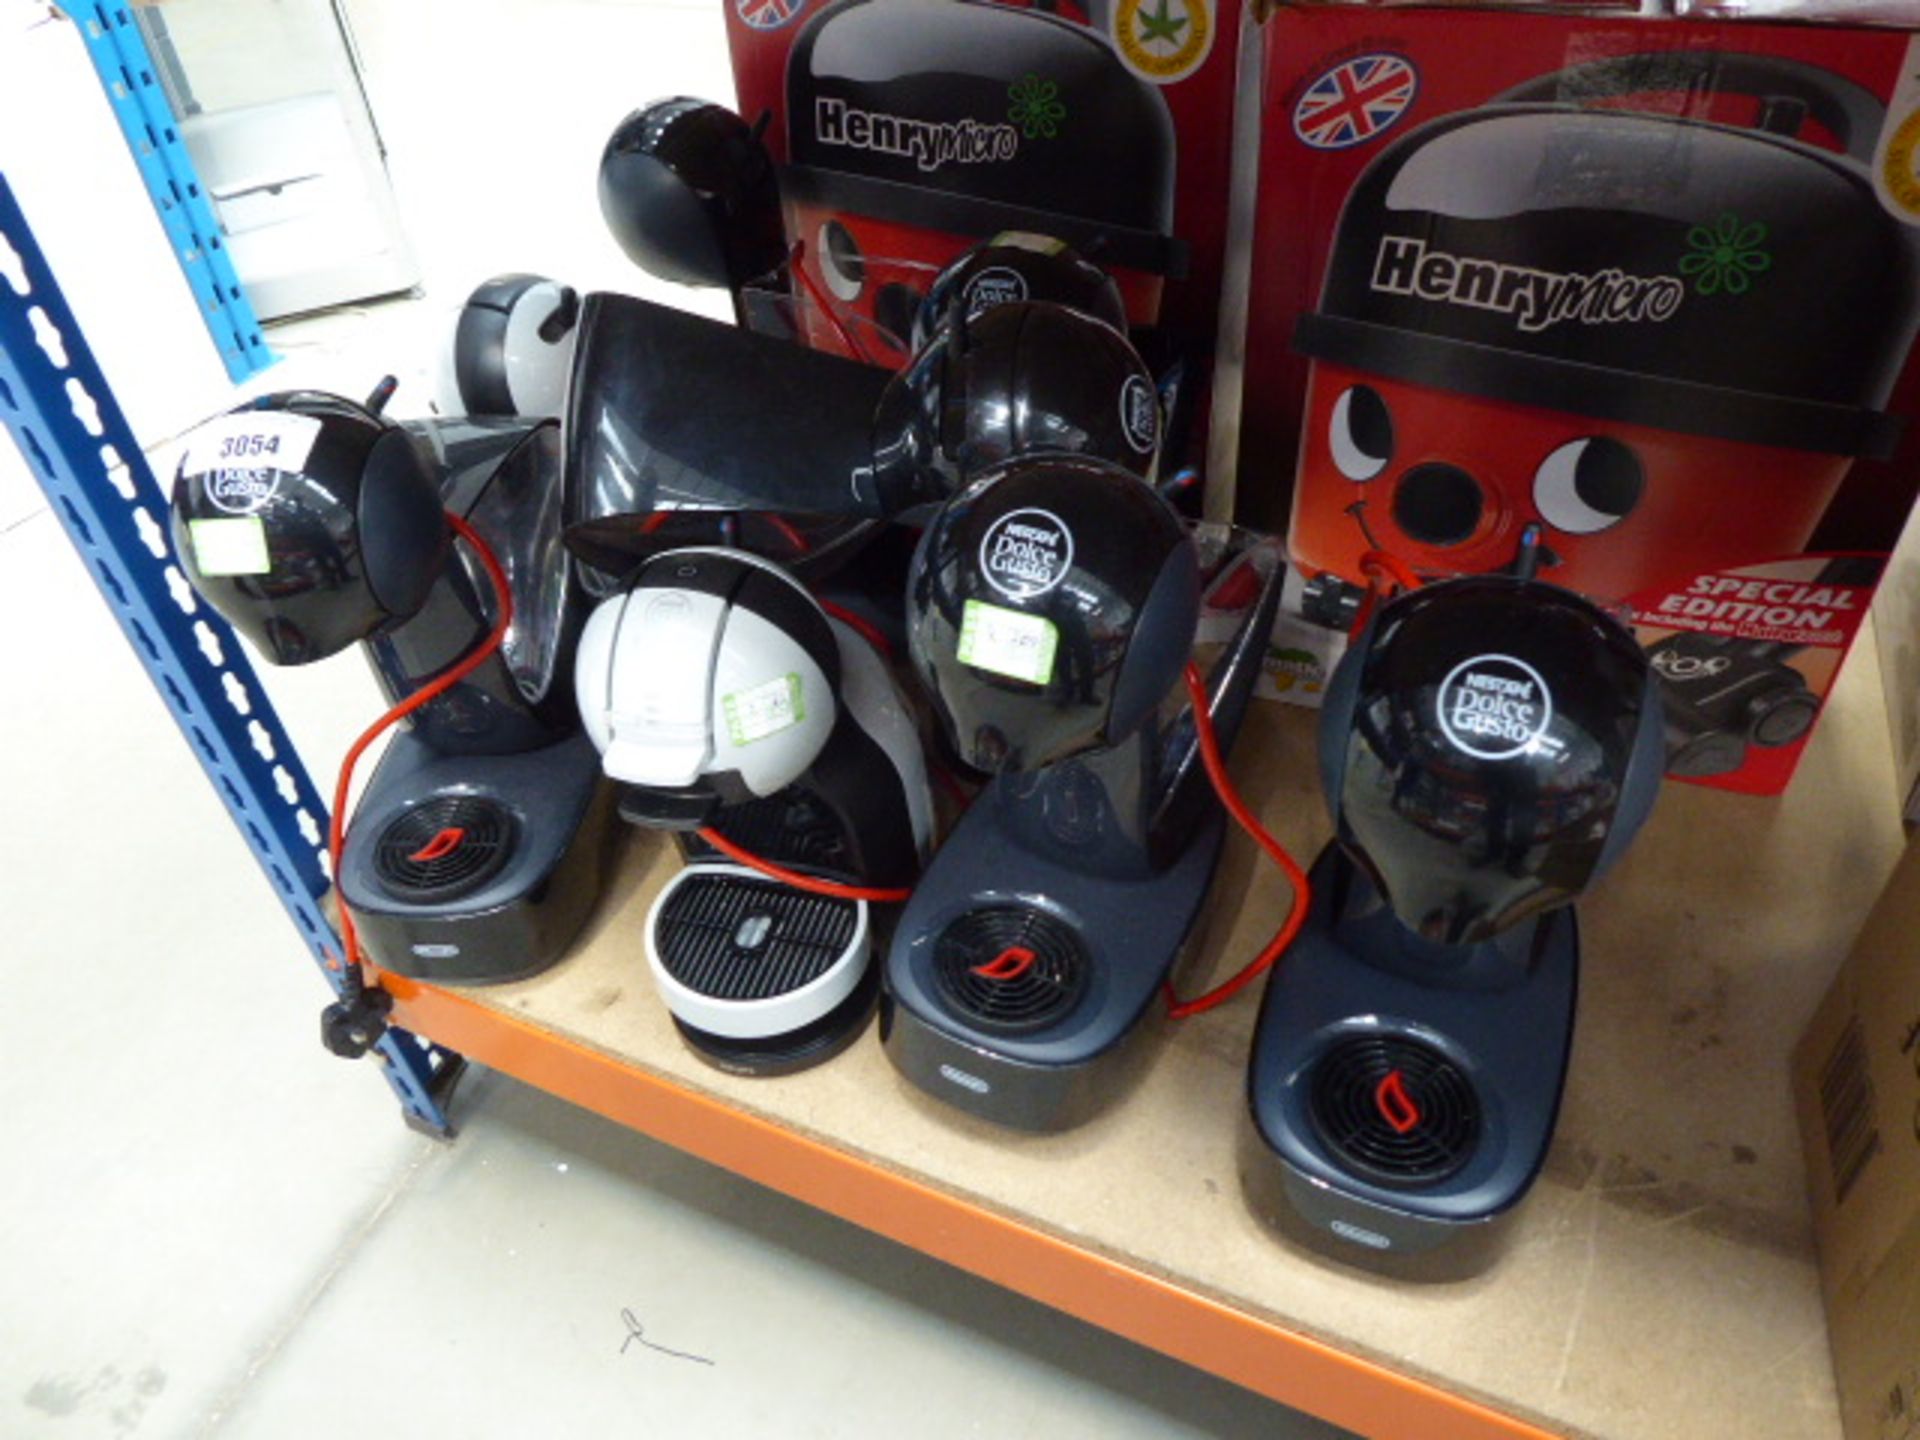 8 unboxed Nescafe Dolce Gusto coffee machines (some complete, some incomplete)